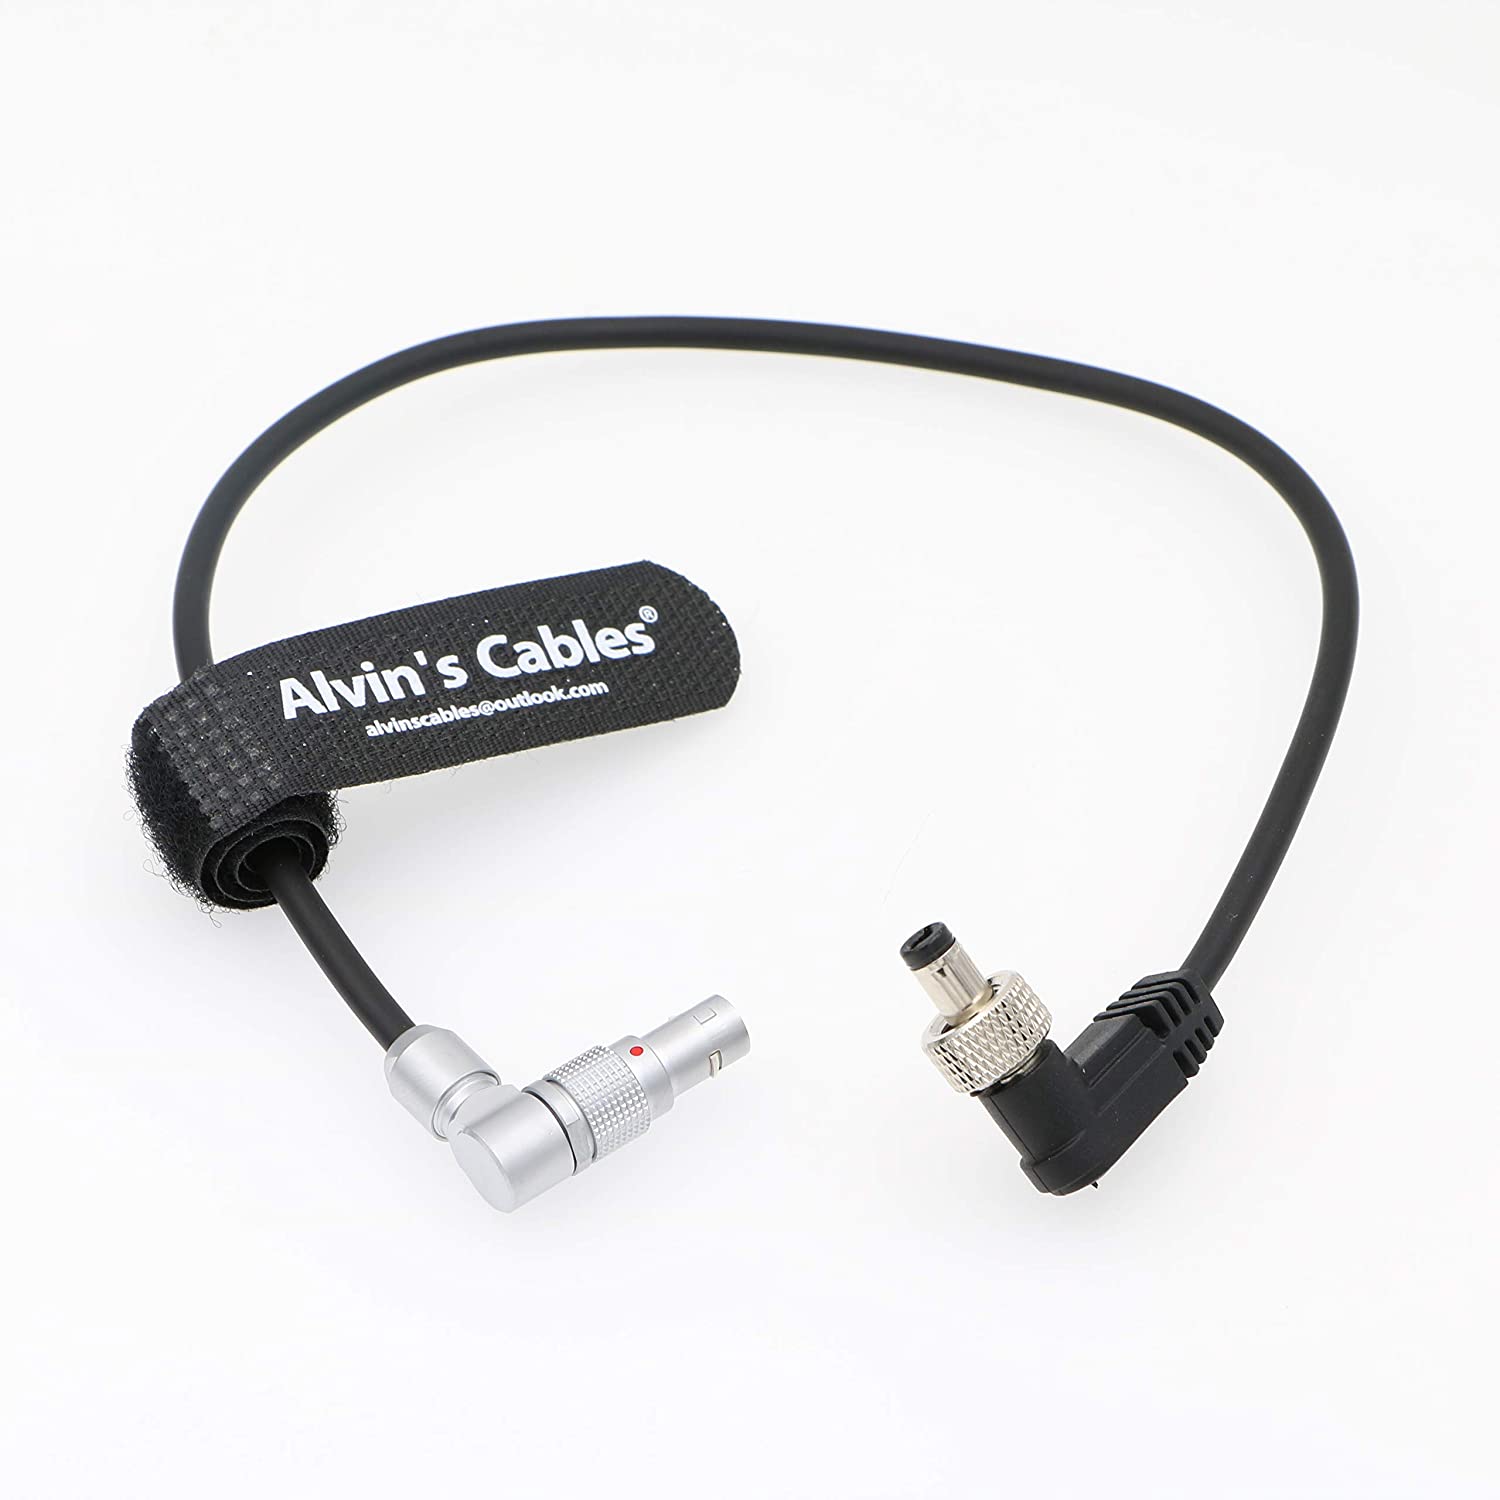 Alvin’s Cables Z CAM E2 S6 F6 F8 Rotatable Right Angle 2 Pin to Lock DC Power Cable for Atomos Shinobi Ninja V Monitor Adjustable 90 Degrees 2 Pin Male to Right Angle Lock DC Cord